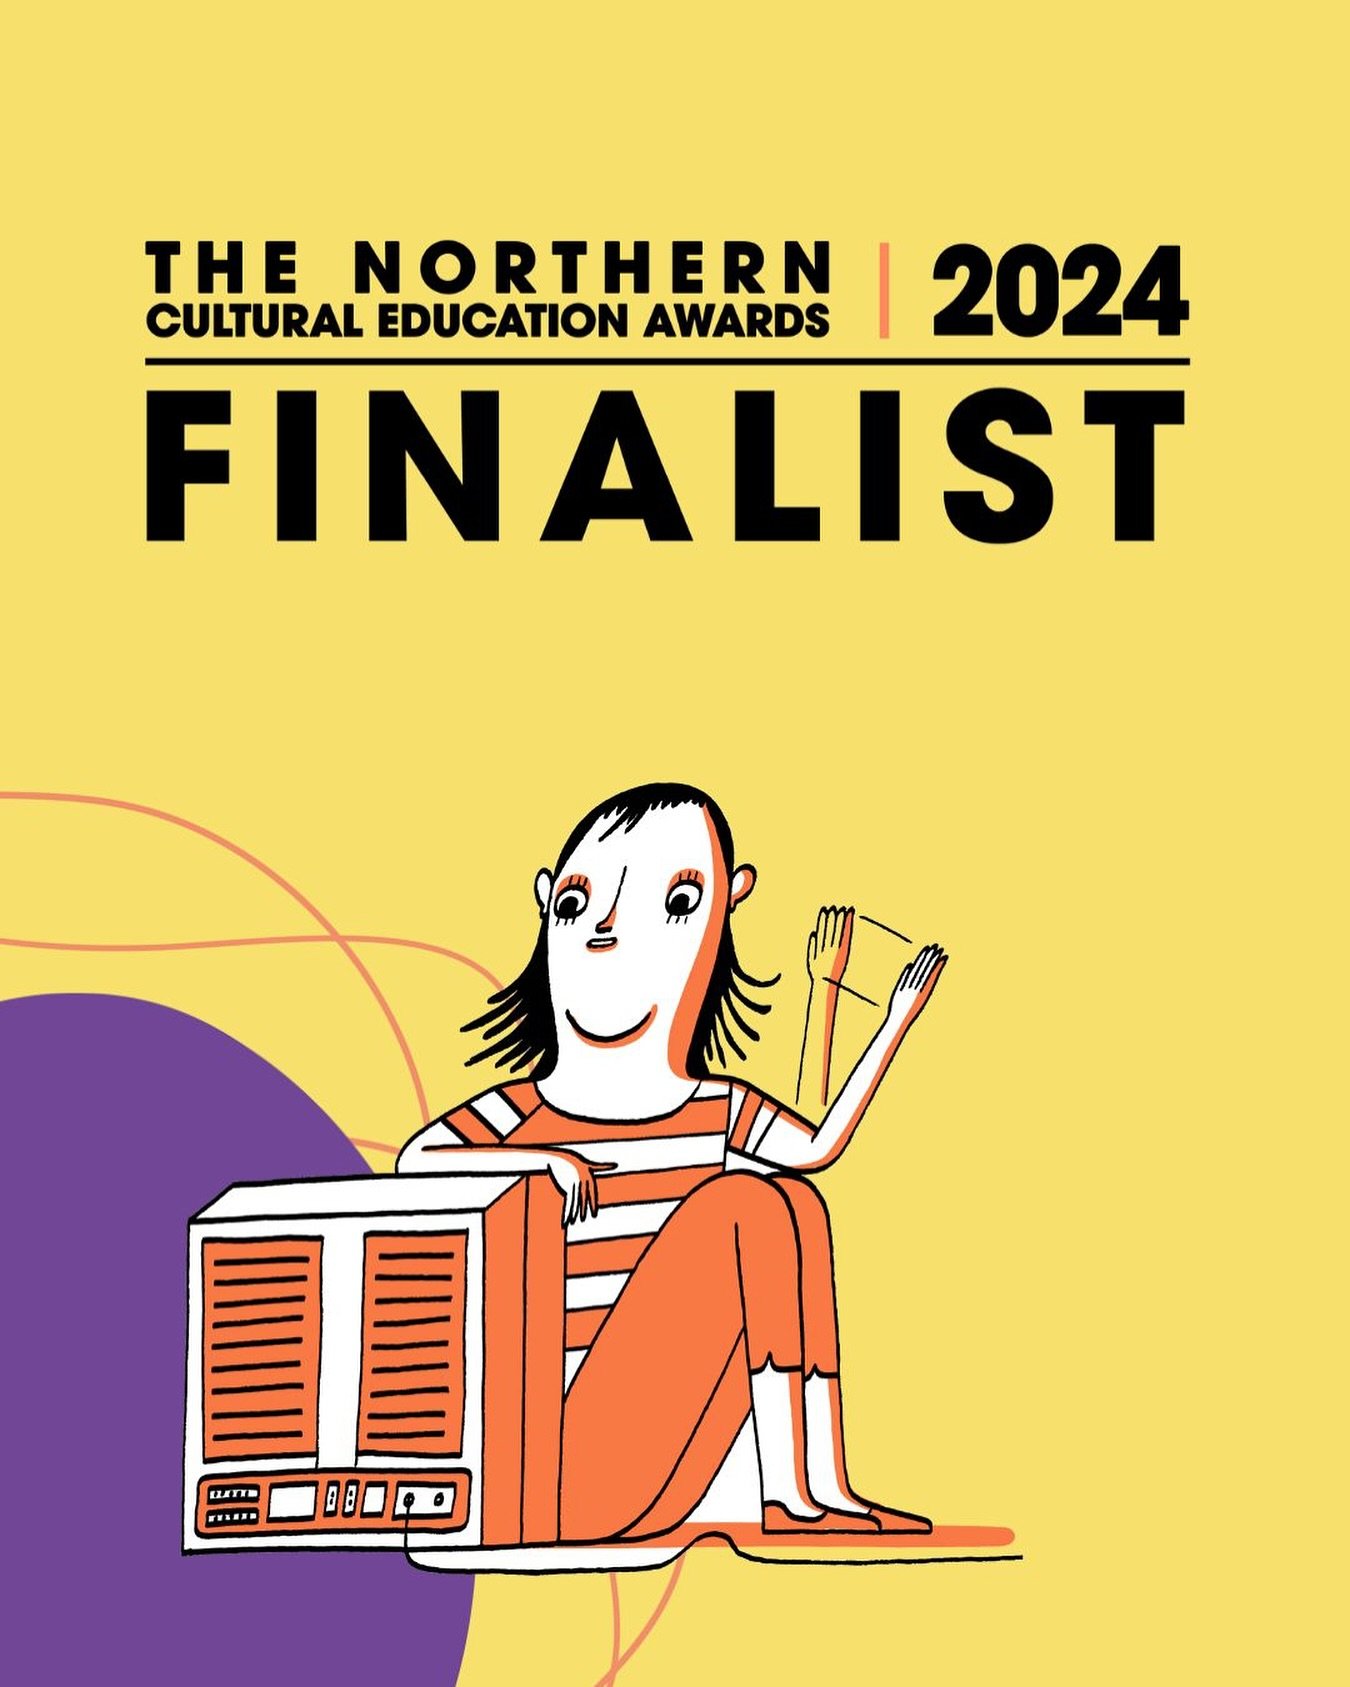 💥News just in. We&rsquo;re finalists!

In the Northern Cultural Education Awards 2024. 🤩

My co-owned young person social impact company - Skills 4 All - has been selected as a finalist in the Grassroots Award &ndash; Small But Mighty category. 

T